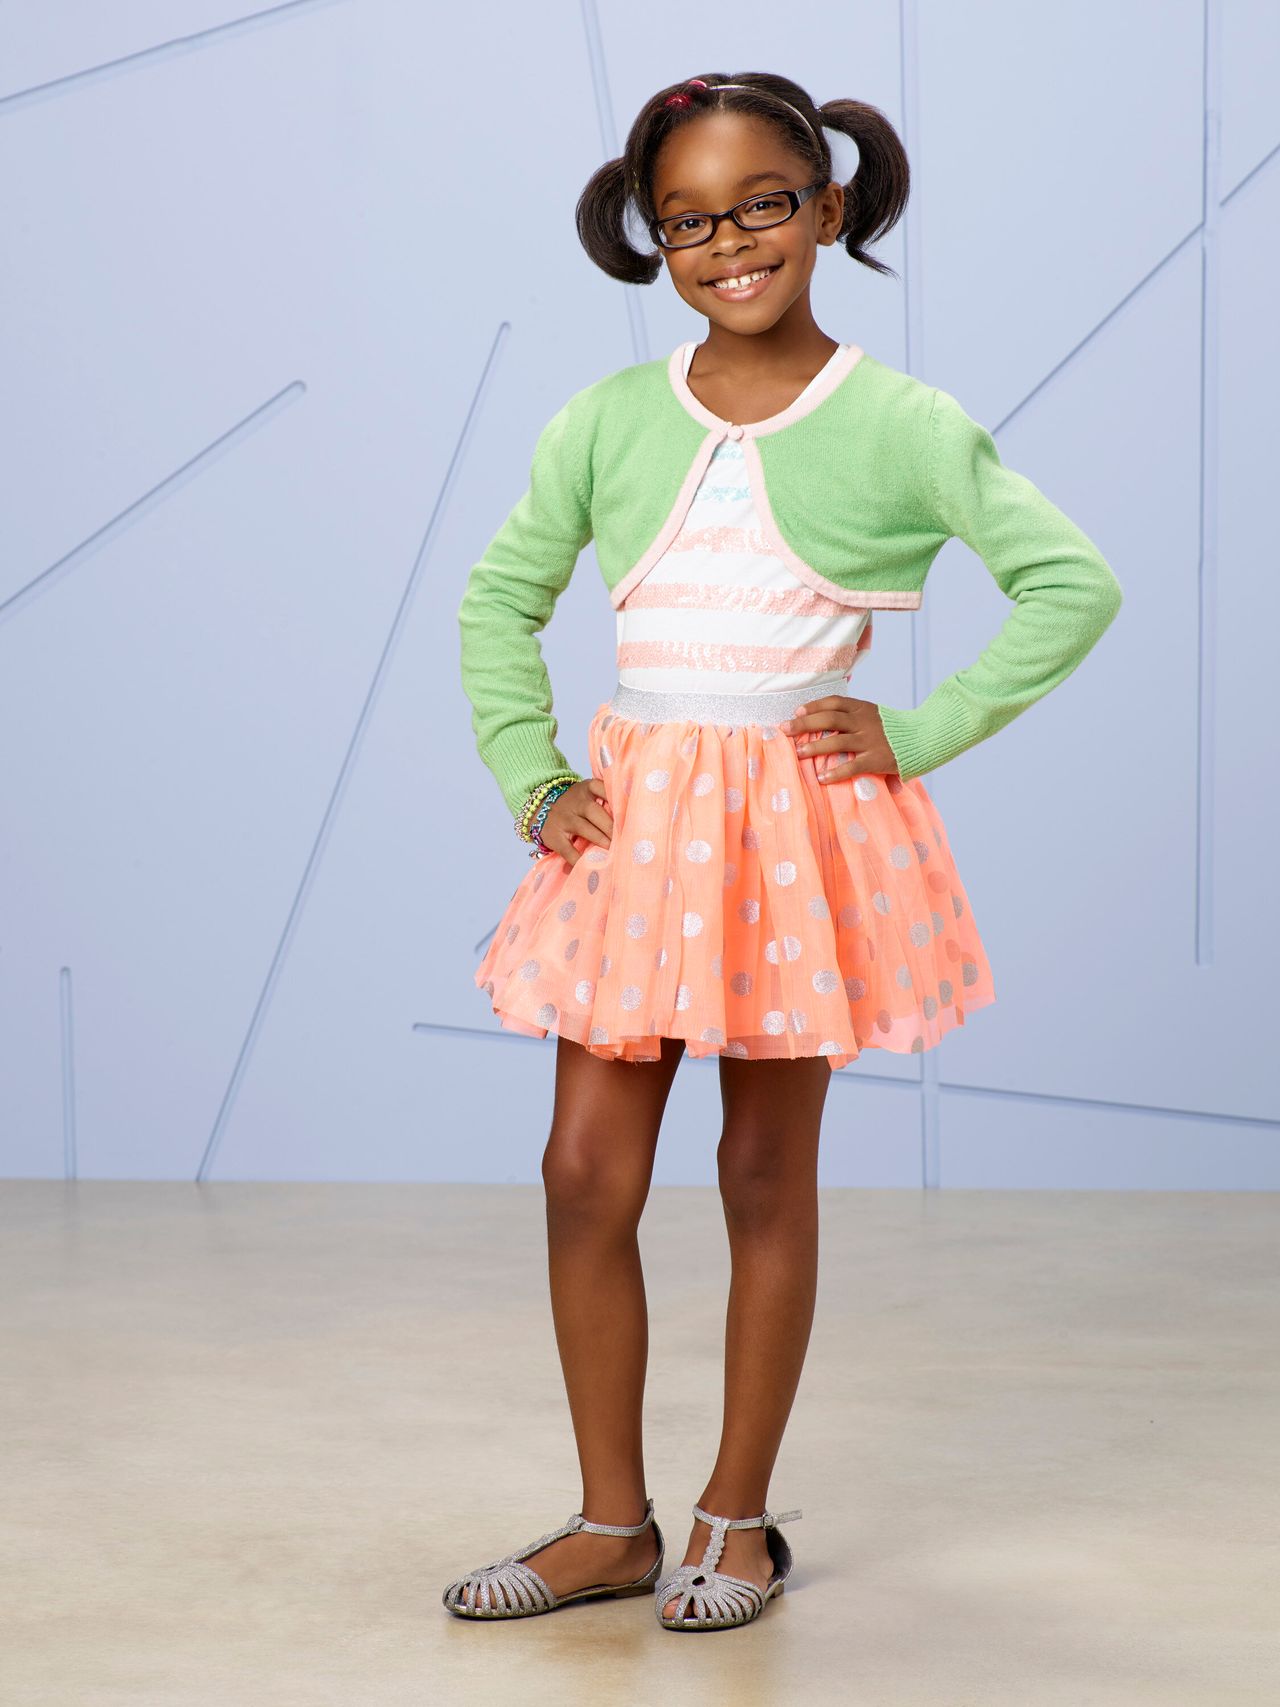 Though she auditioned for the role of Diane Johnson when she was 8, Martin told HuffPost she had turned 9 by the time she filmed the pilot for "Black-ish."